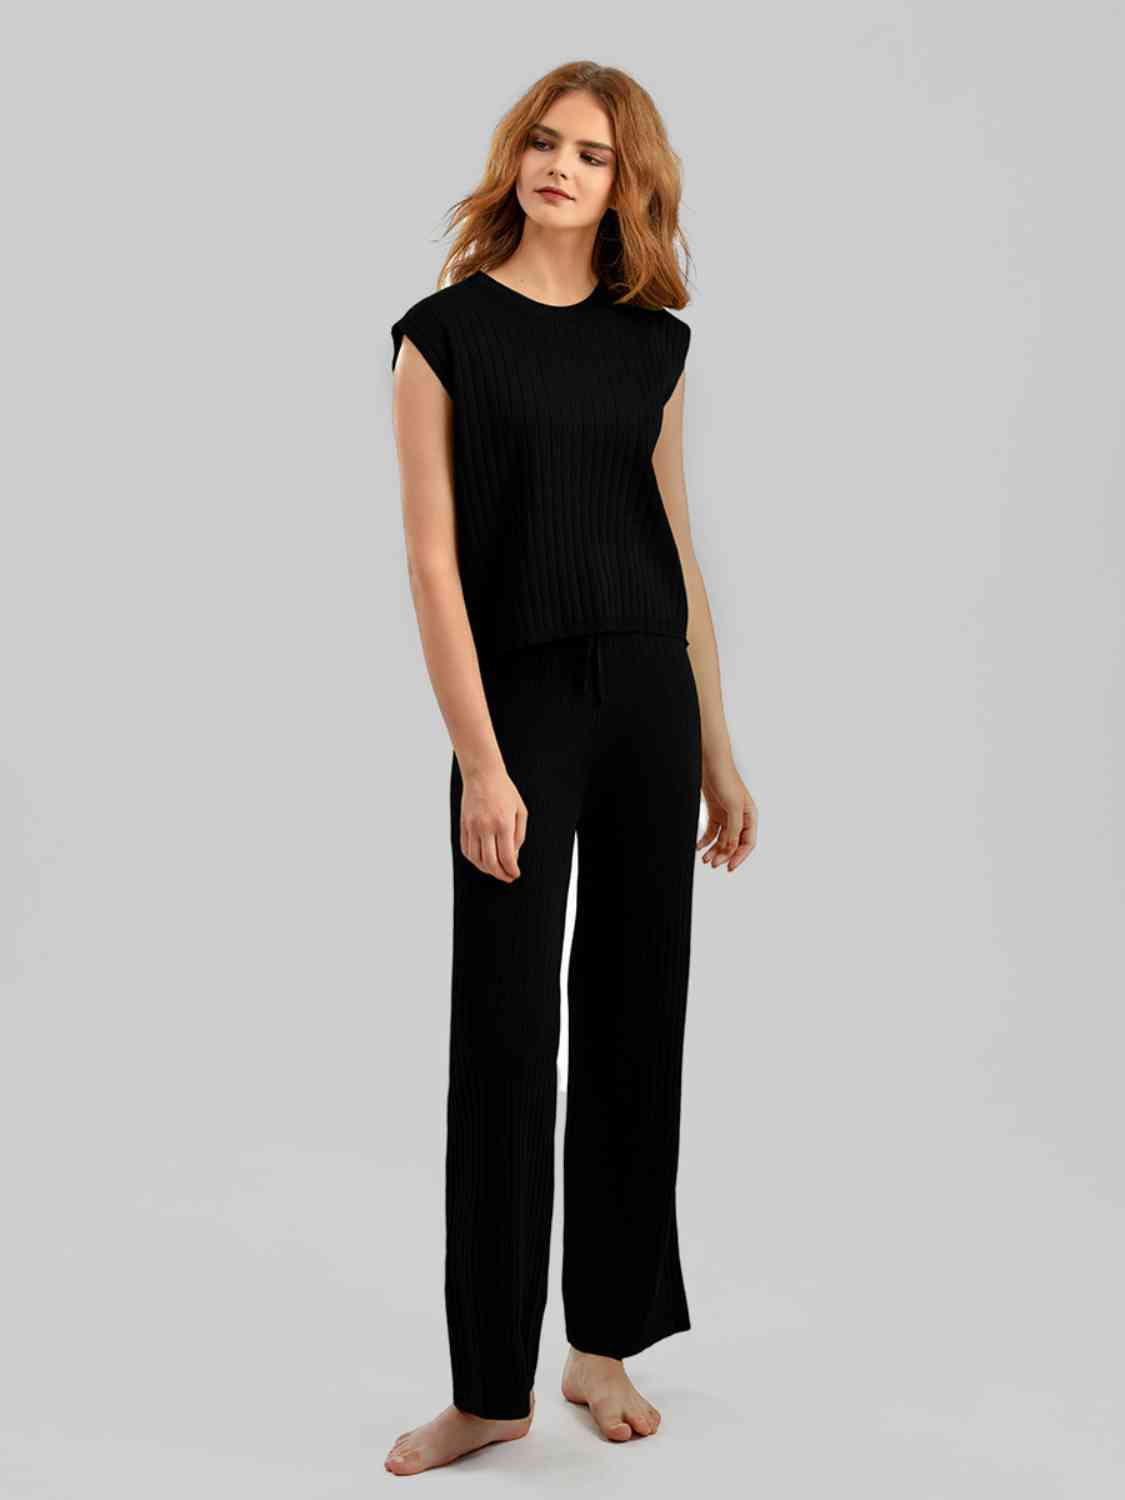 Women's Ribbed Sweater Vest and Drawstring Knit Pants Set Black One Size